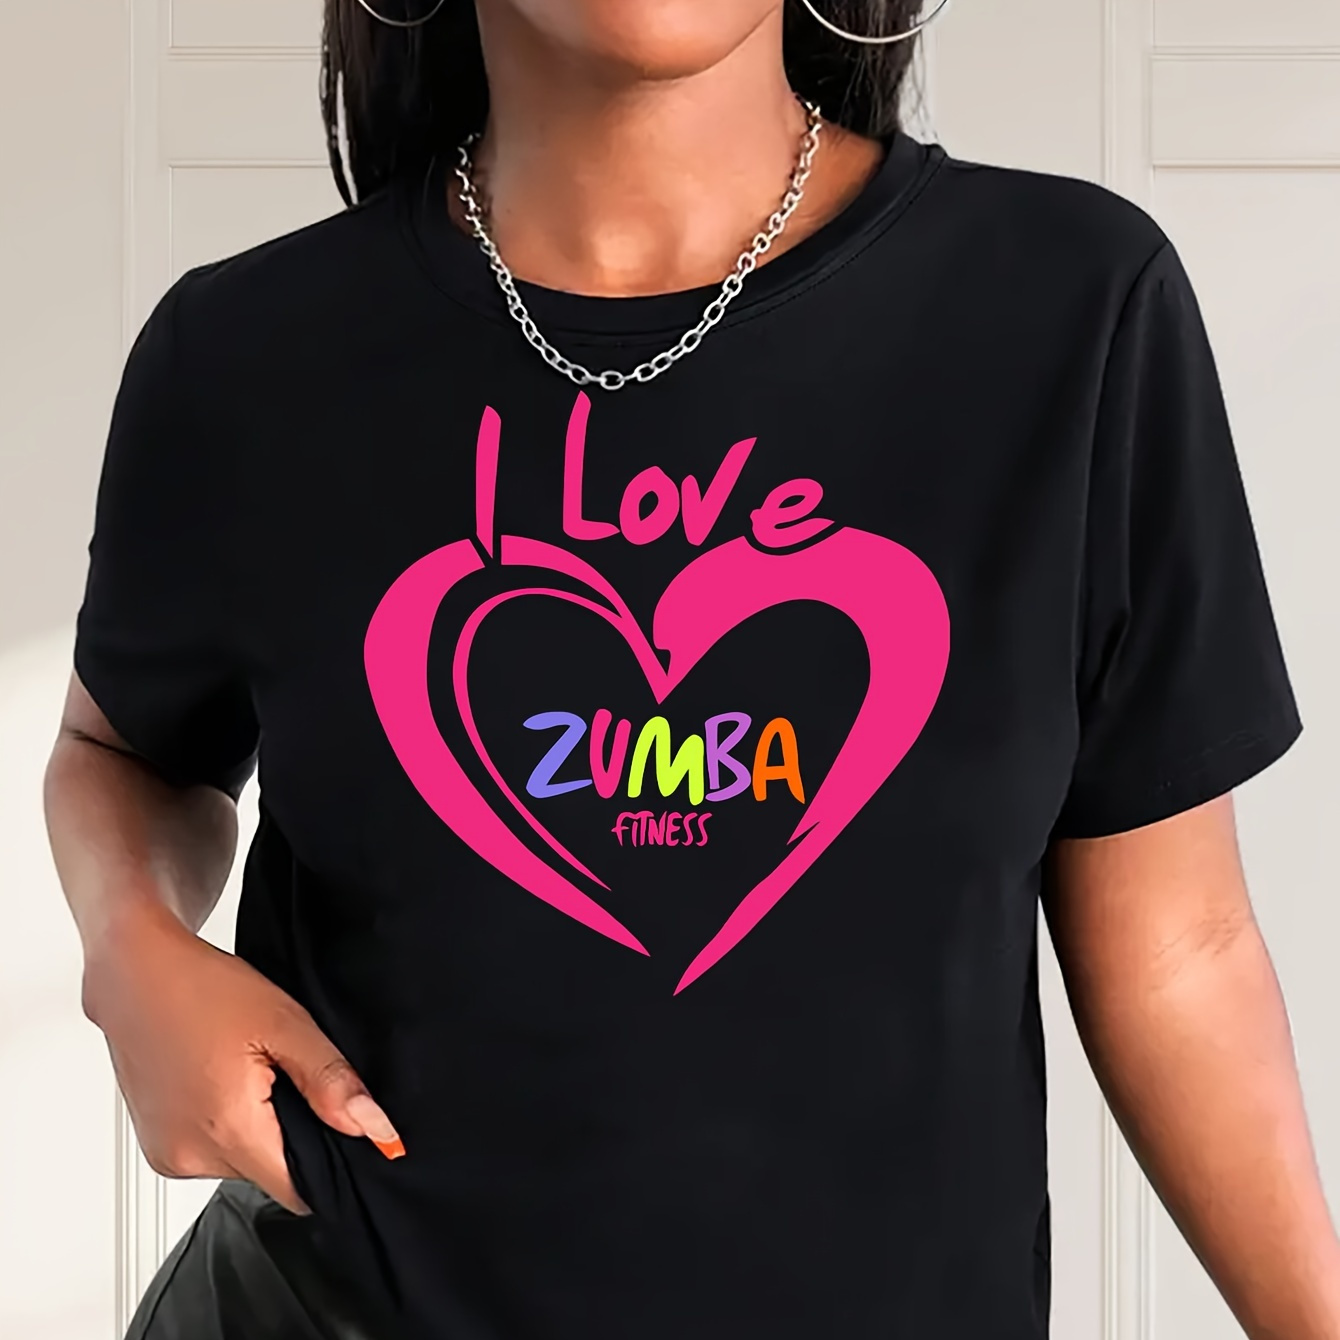 

I Love Zumba Print Crew Neck T-shirt, Short Sleeve Casual Top For Spring & Summer, Women's Clothing